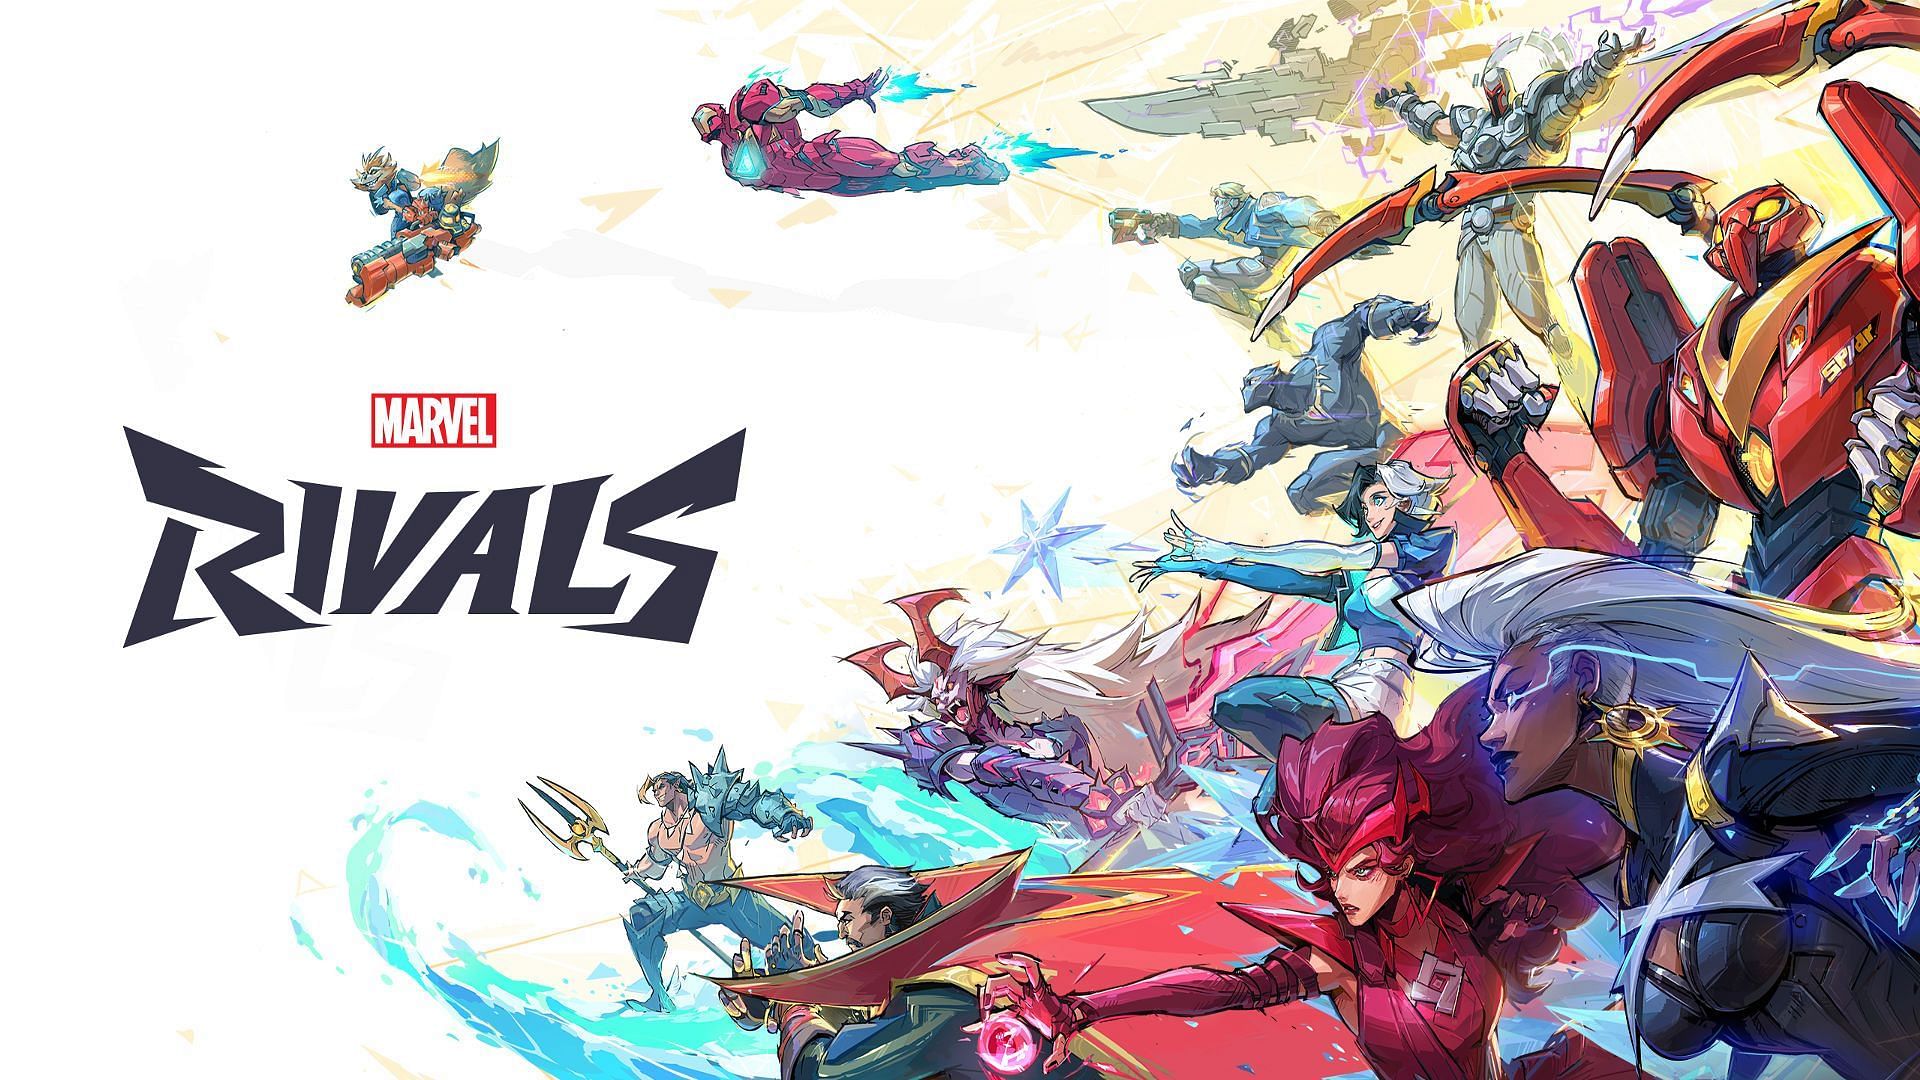 Marvel Rivals cover.